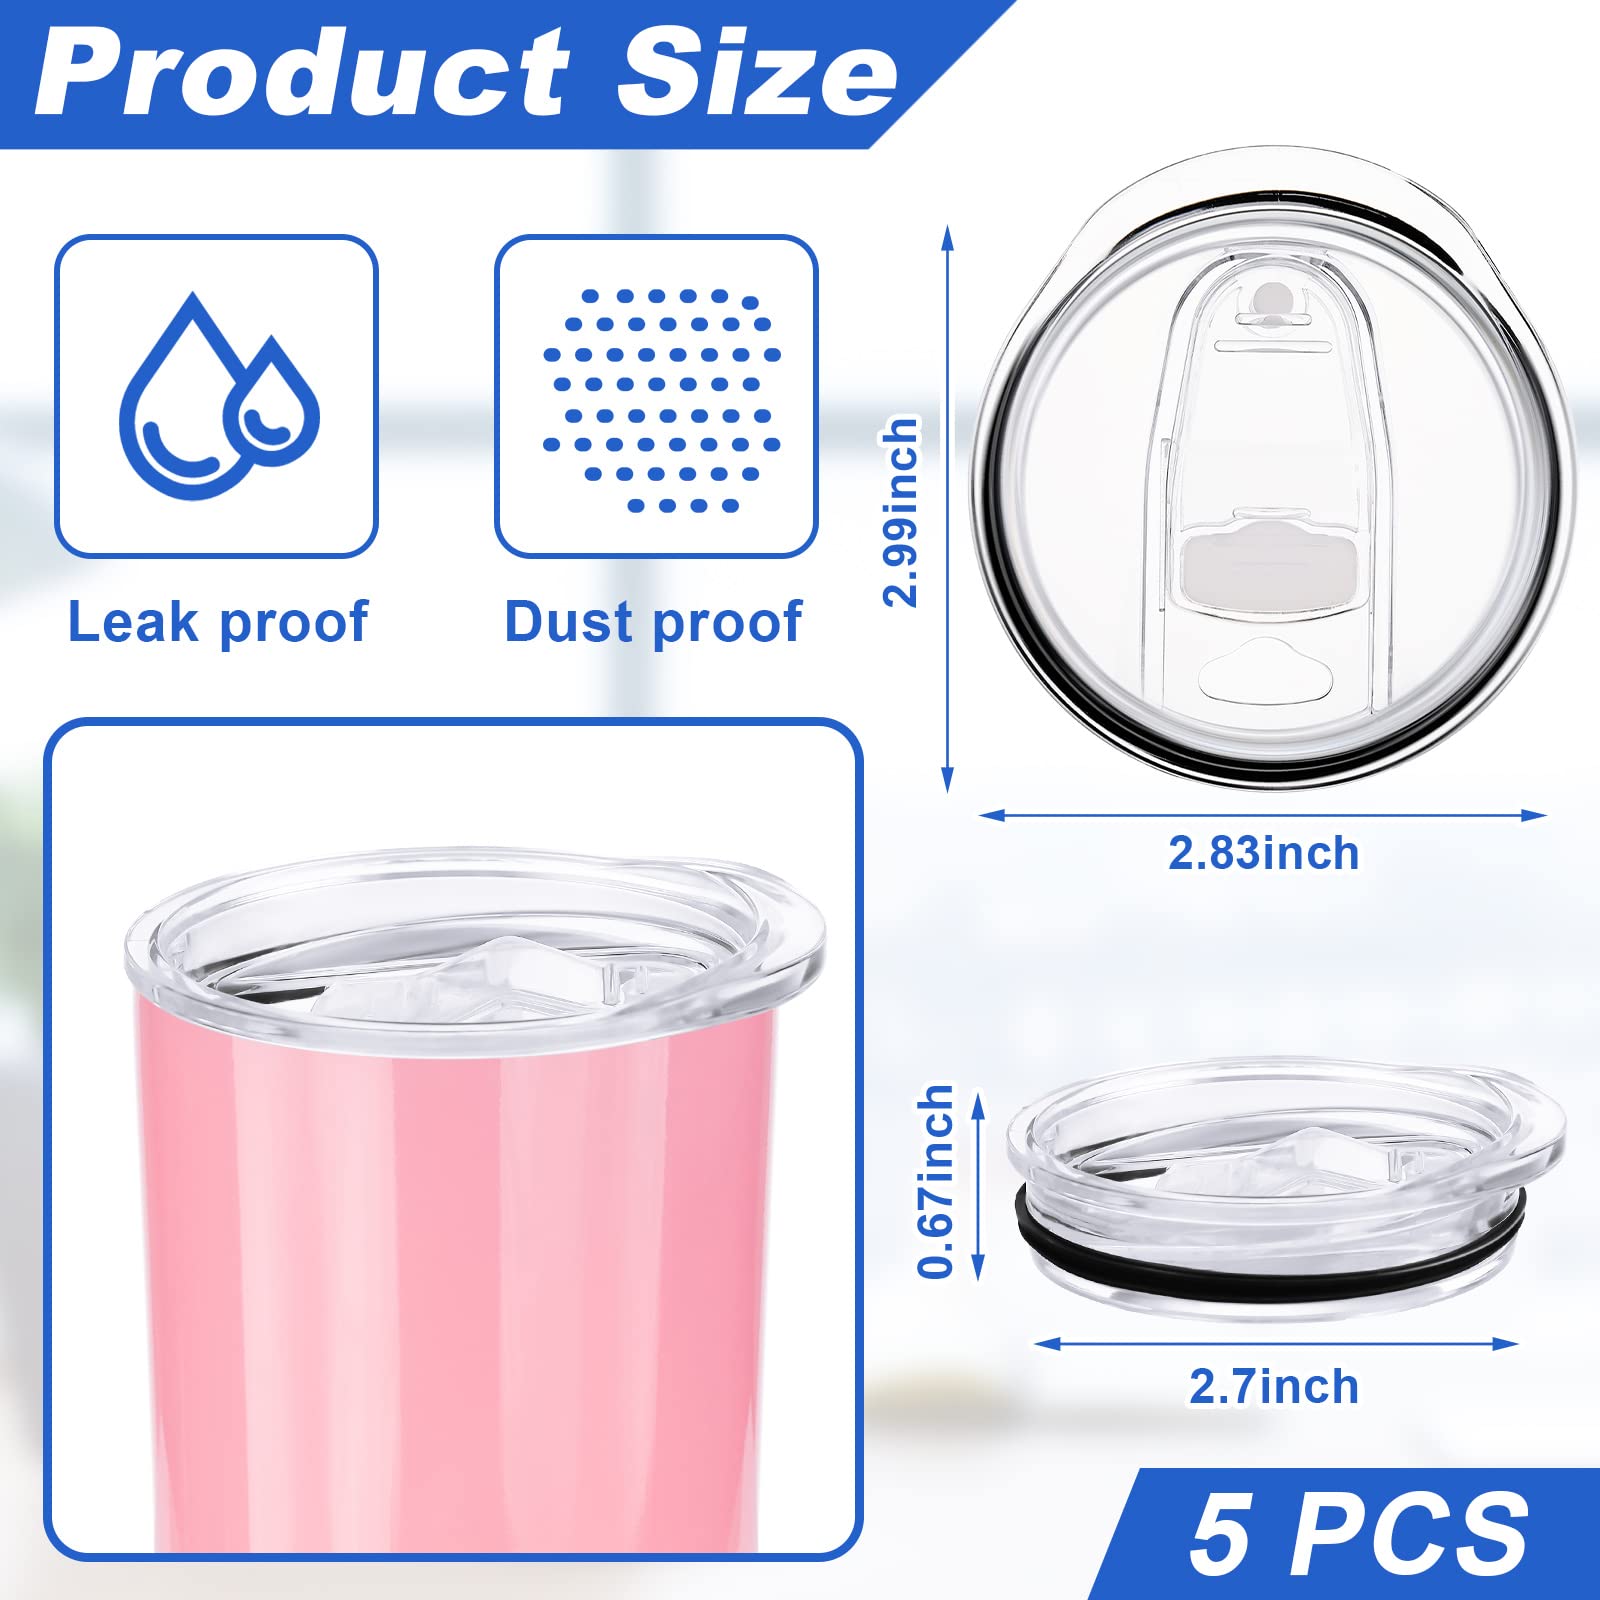 Skinny Replacement Lids Tumbler Replacement Lids Plastic Splash Resistant Lids Covers Spill Proof Skinny Tumbler Lid Clear Cup Covers for Mouth Tumbler Cooler Cup (5 Pack, 20 oz)